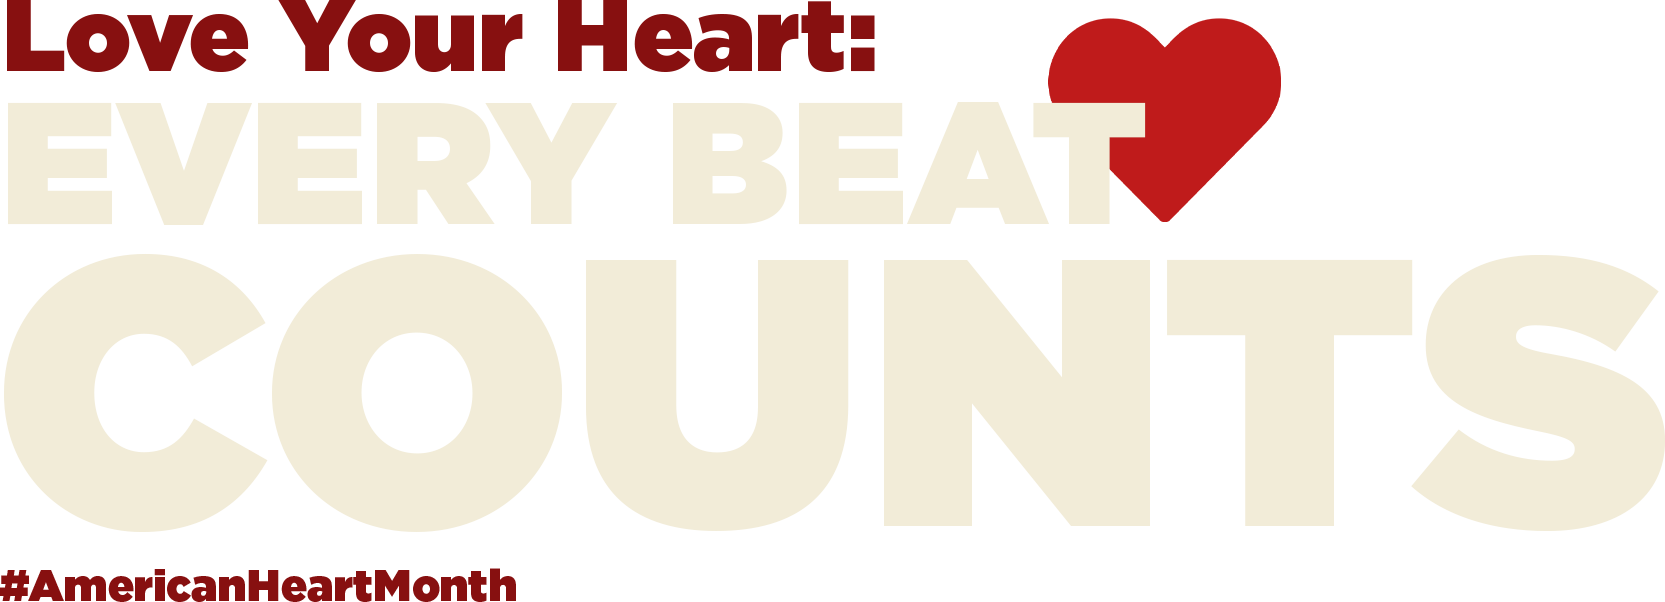 Love Your Heart: Every Beat Counts #AmericanHeartMonth